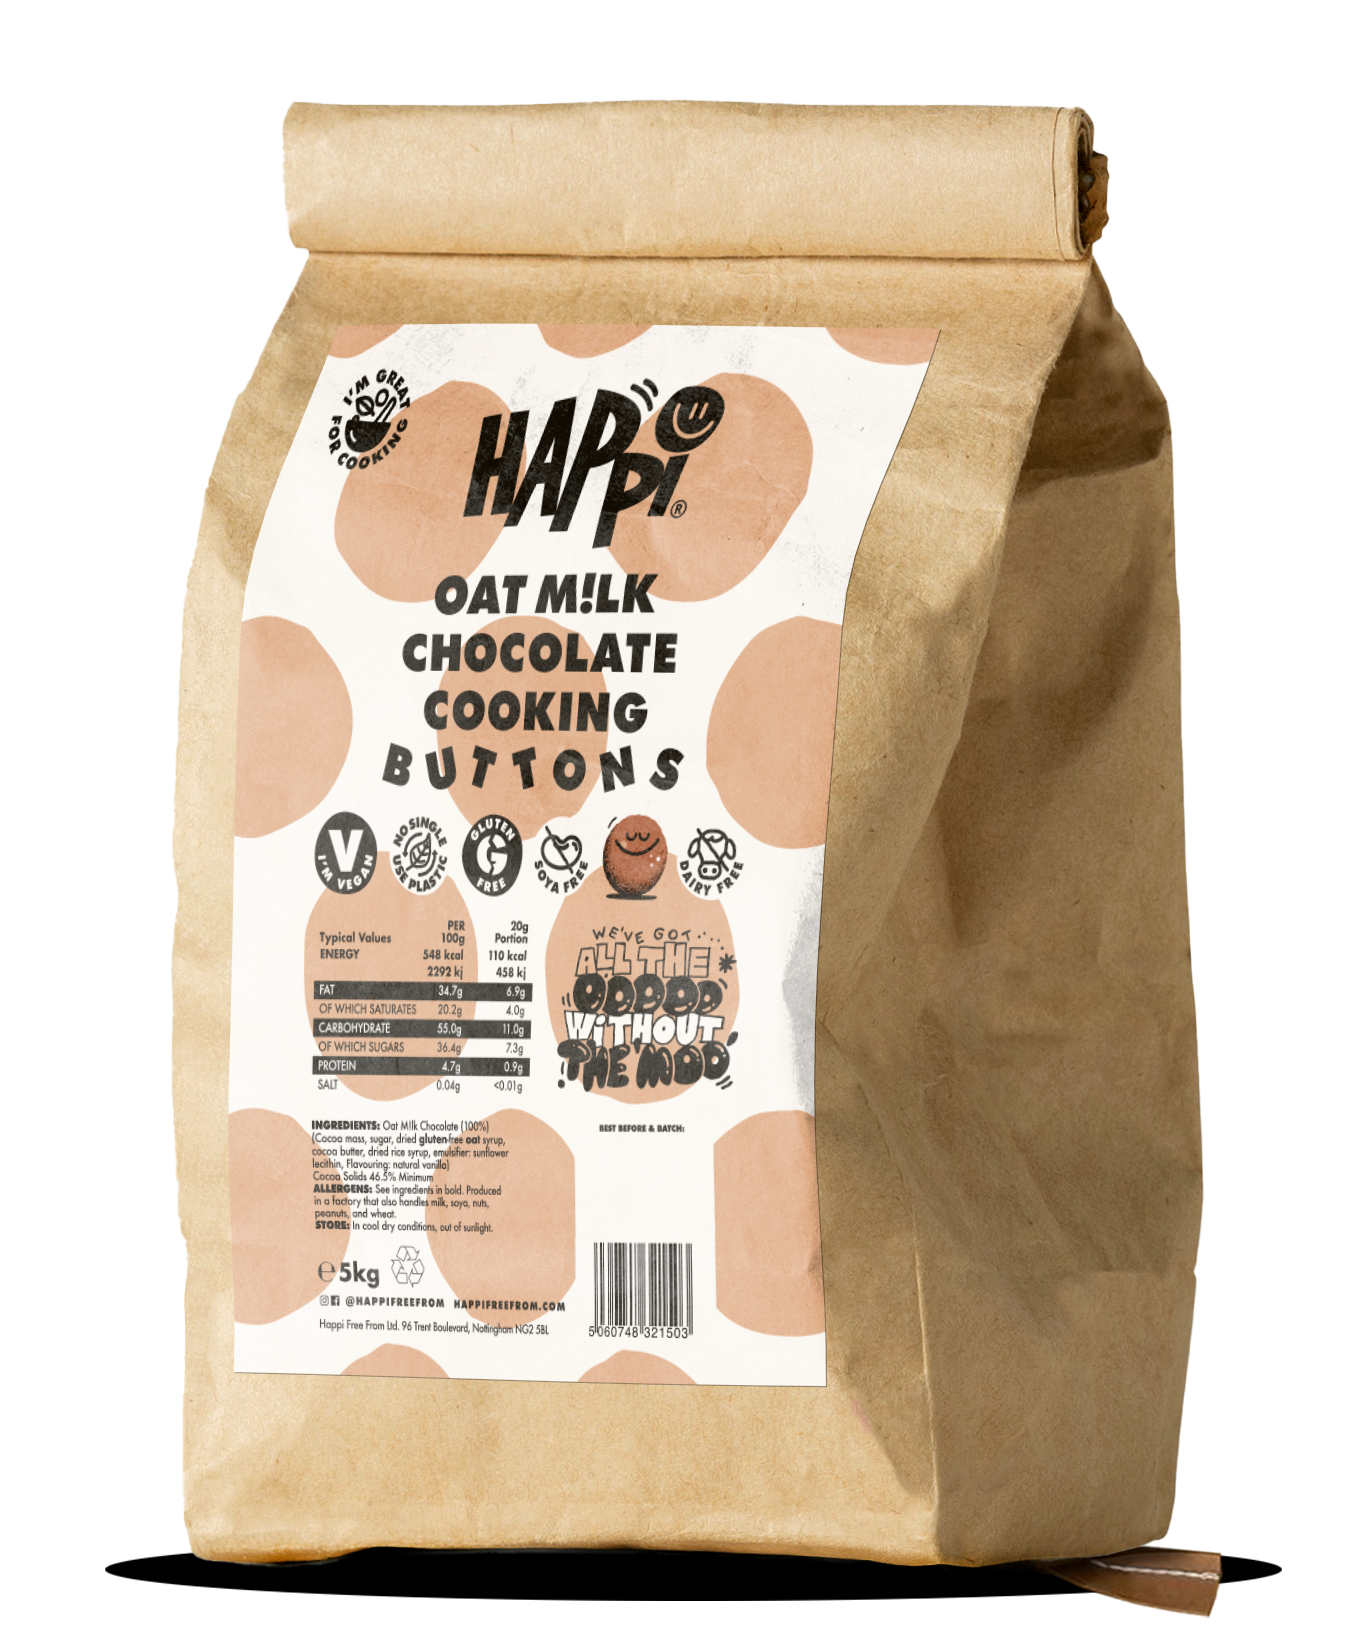 A 5kg Bulk bag of Happi Oat M!lk Chocolate Buttons in a paper sack